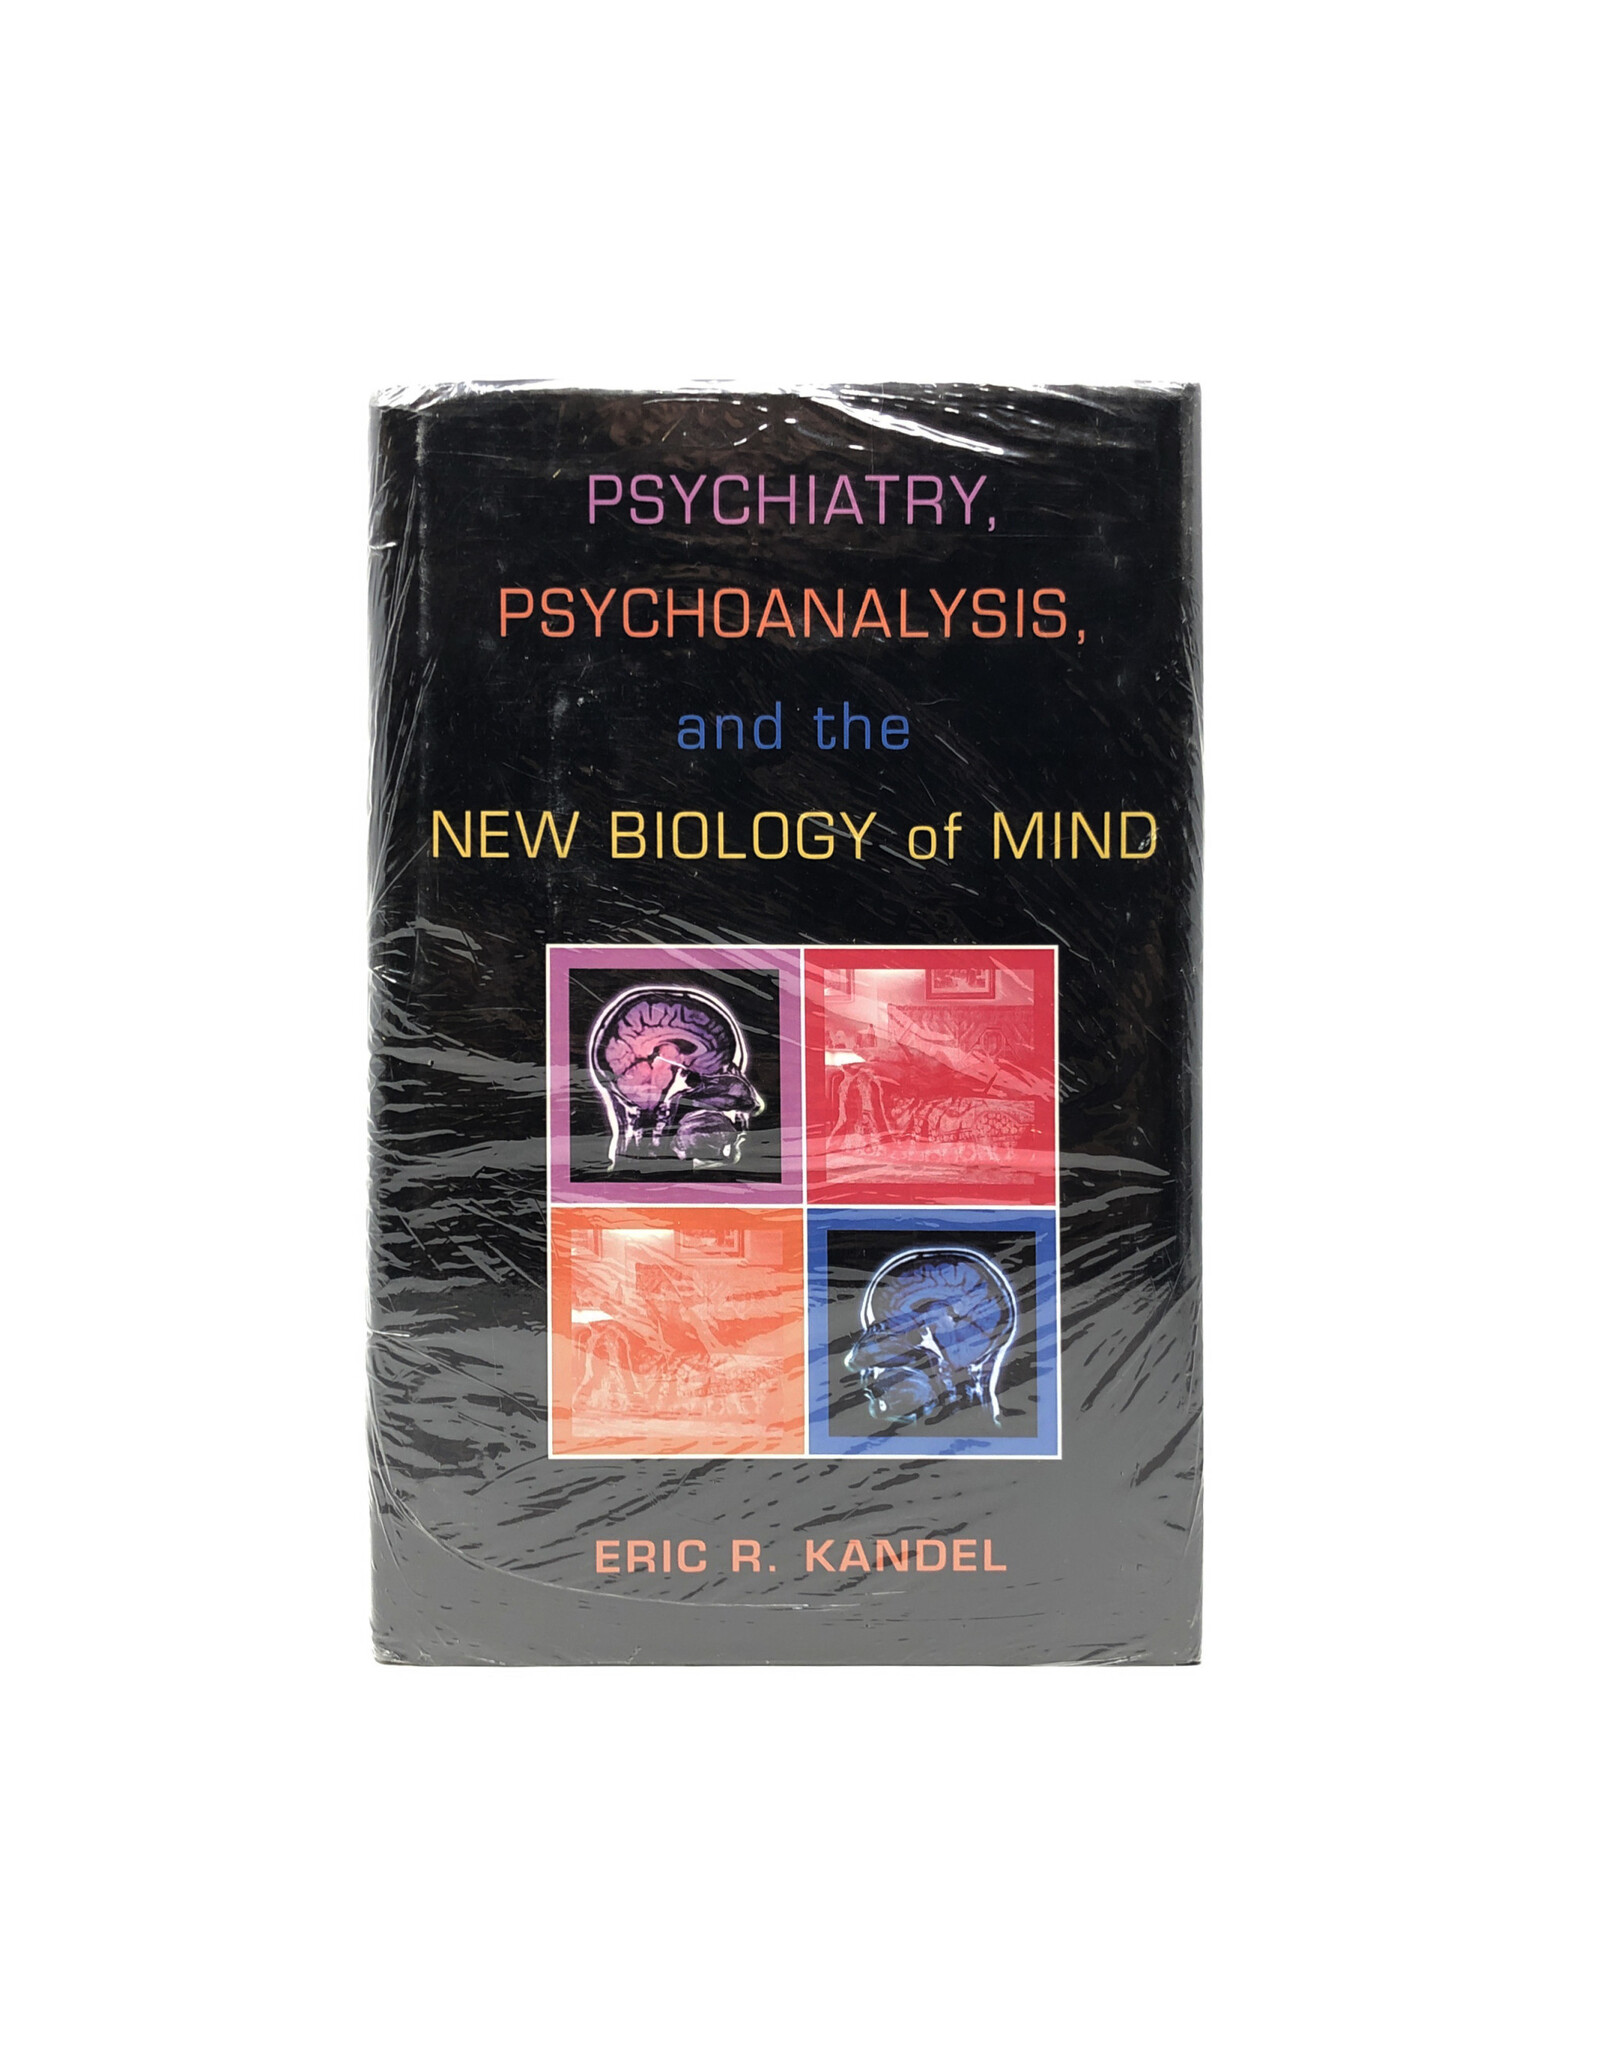 American Psychiatric Publishing Psychiatry, Psychoanalysis and the New Biology of Mind by Eric R. Kandel